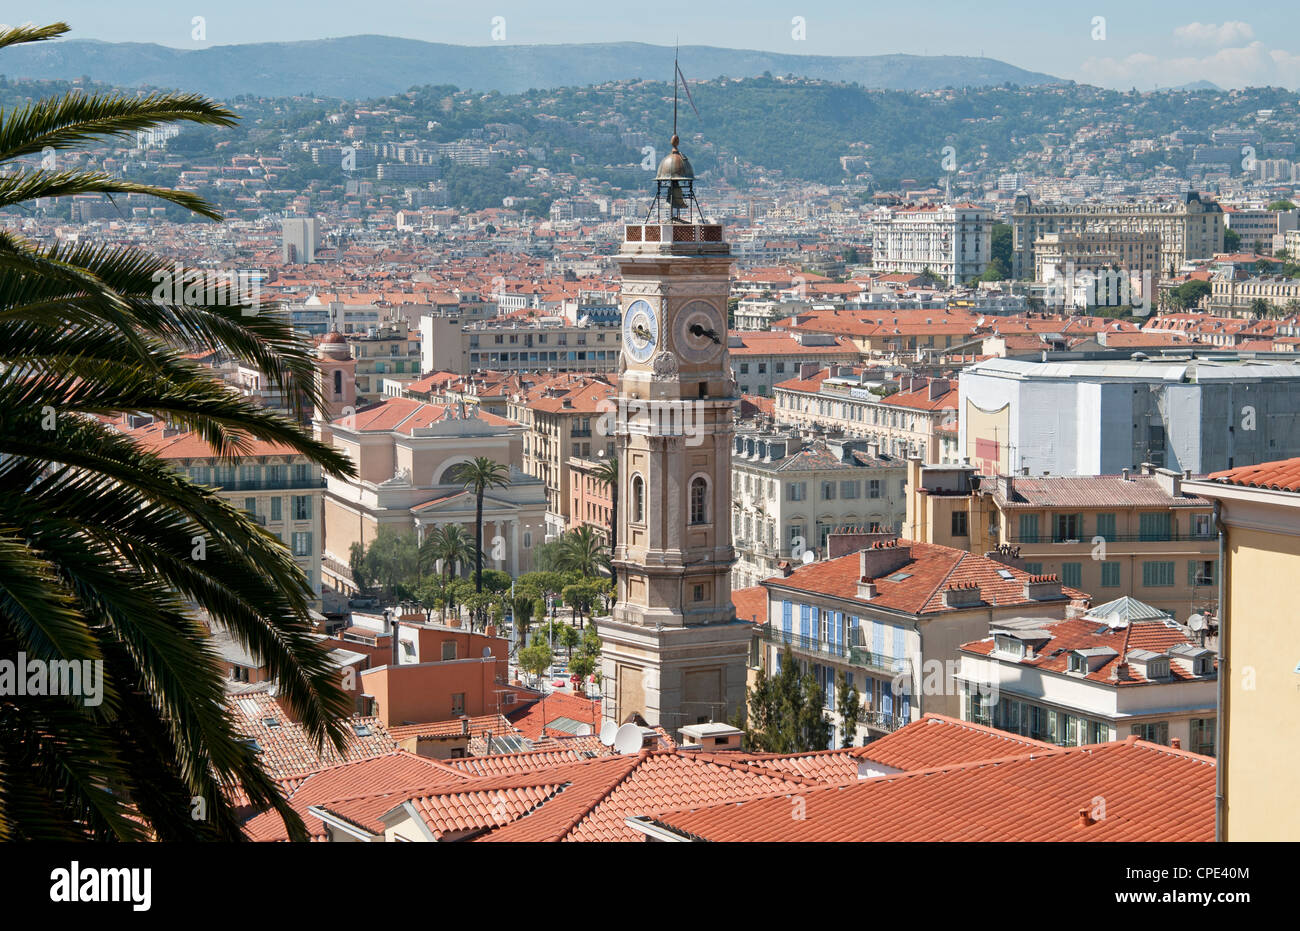 Clock tower and red roof tiles oft he old town of Nice Provence South of France Stock Photo